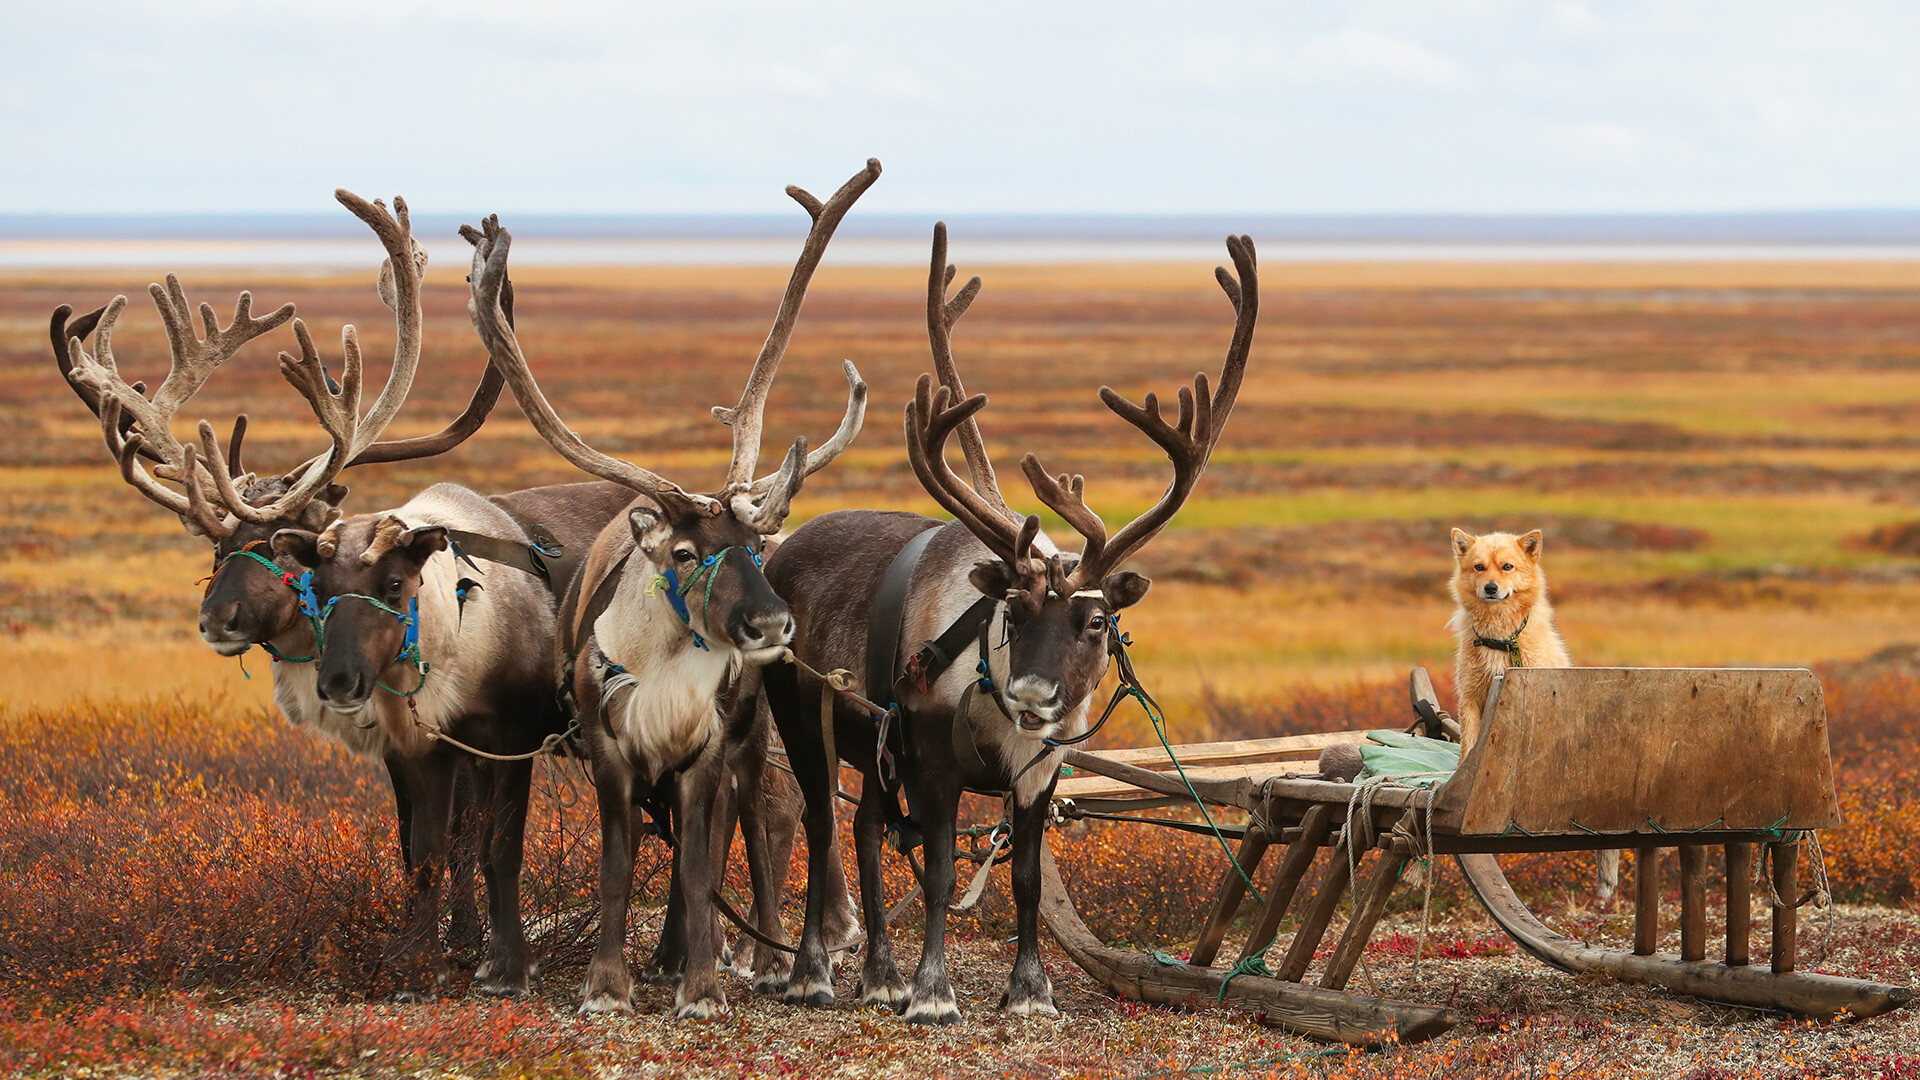 Reindeer are seen at a reindeer breeders' camping ground near the village of Karataika in Nenets Autonomous Area in far northern Russia.